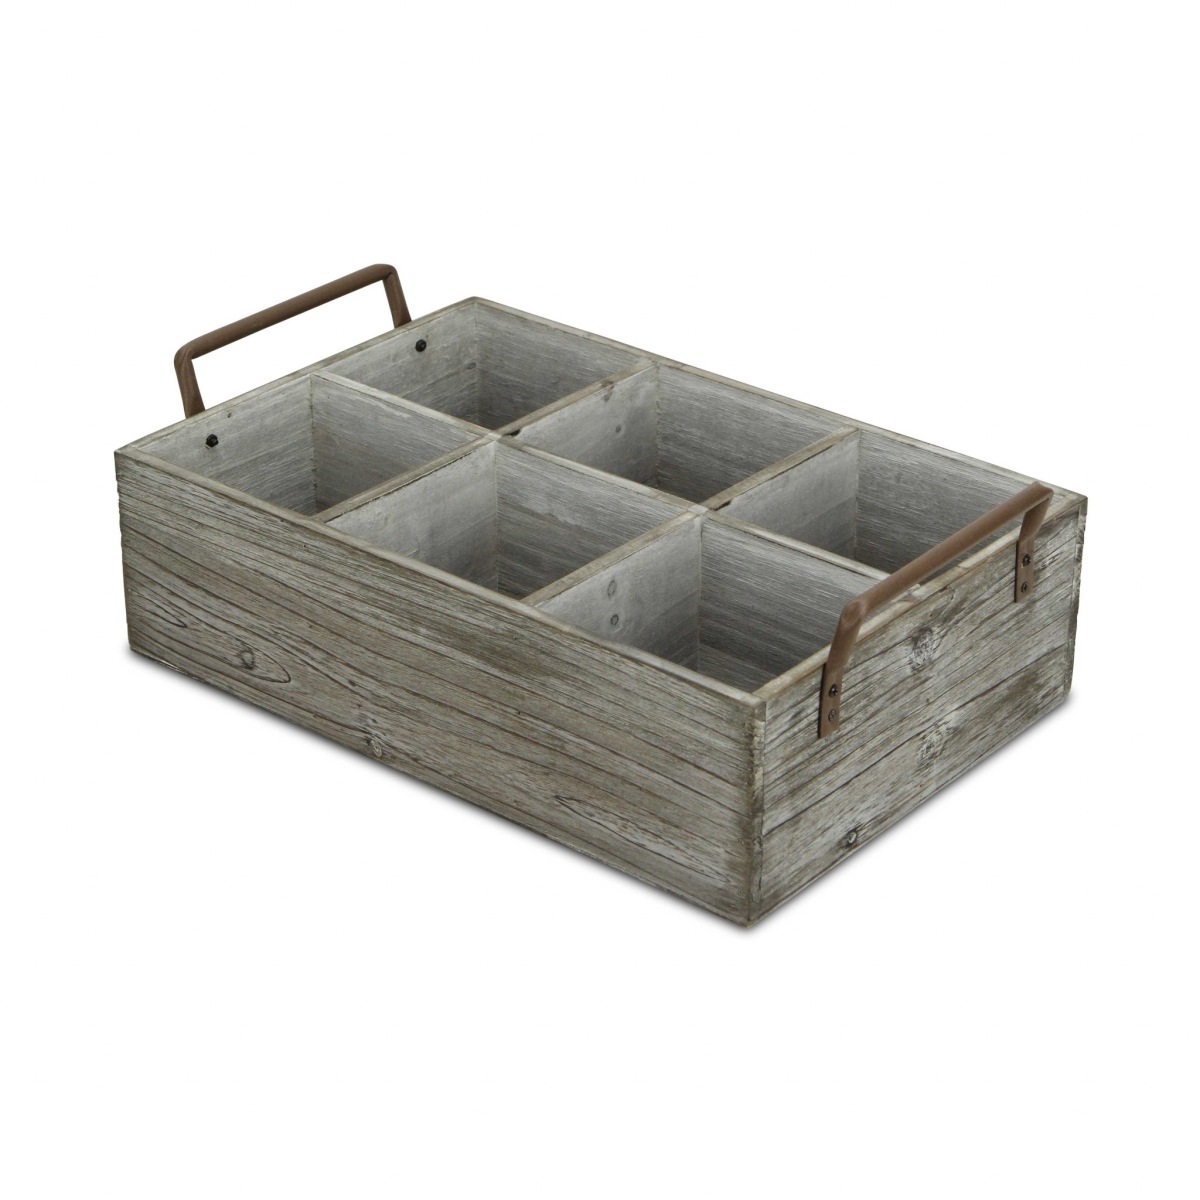 Picture of HomeRoots 399662 5.25 x 15 x 9.25 in. Rustic Gray Wash Six Slot Wooden Caddy